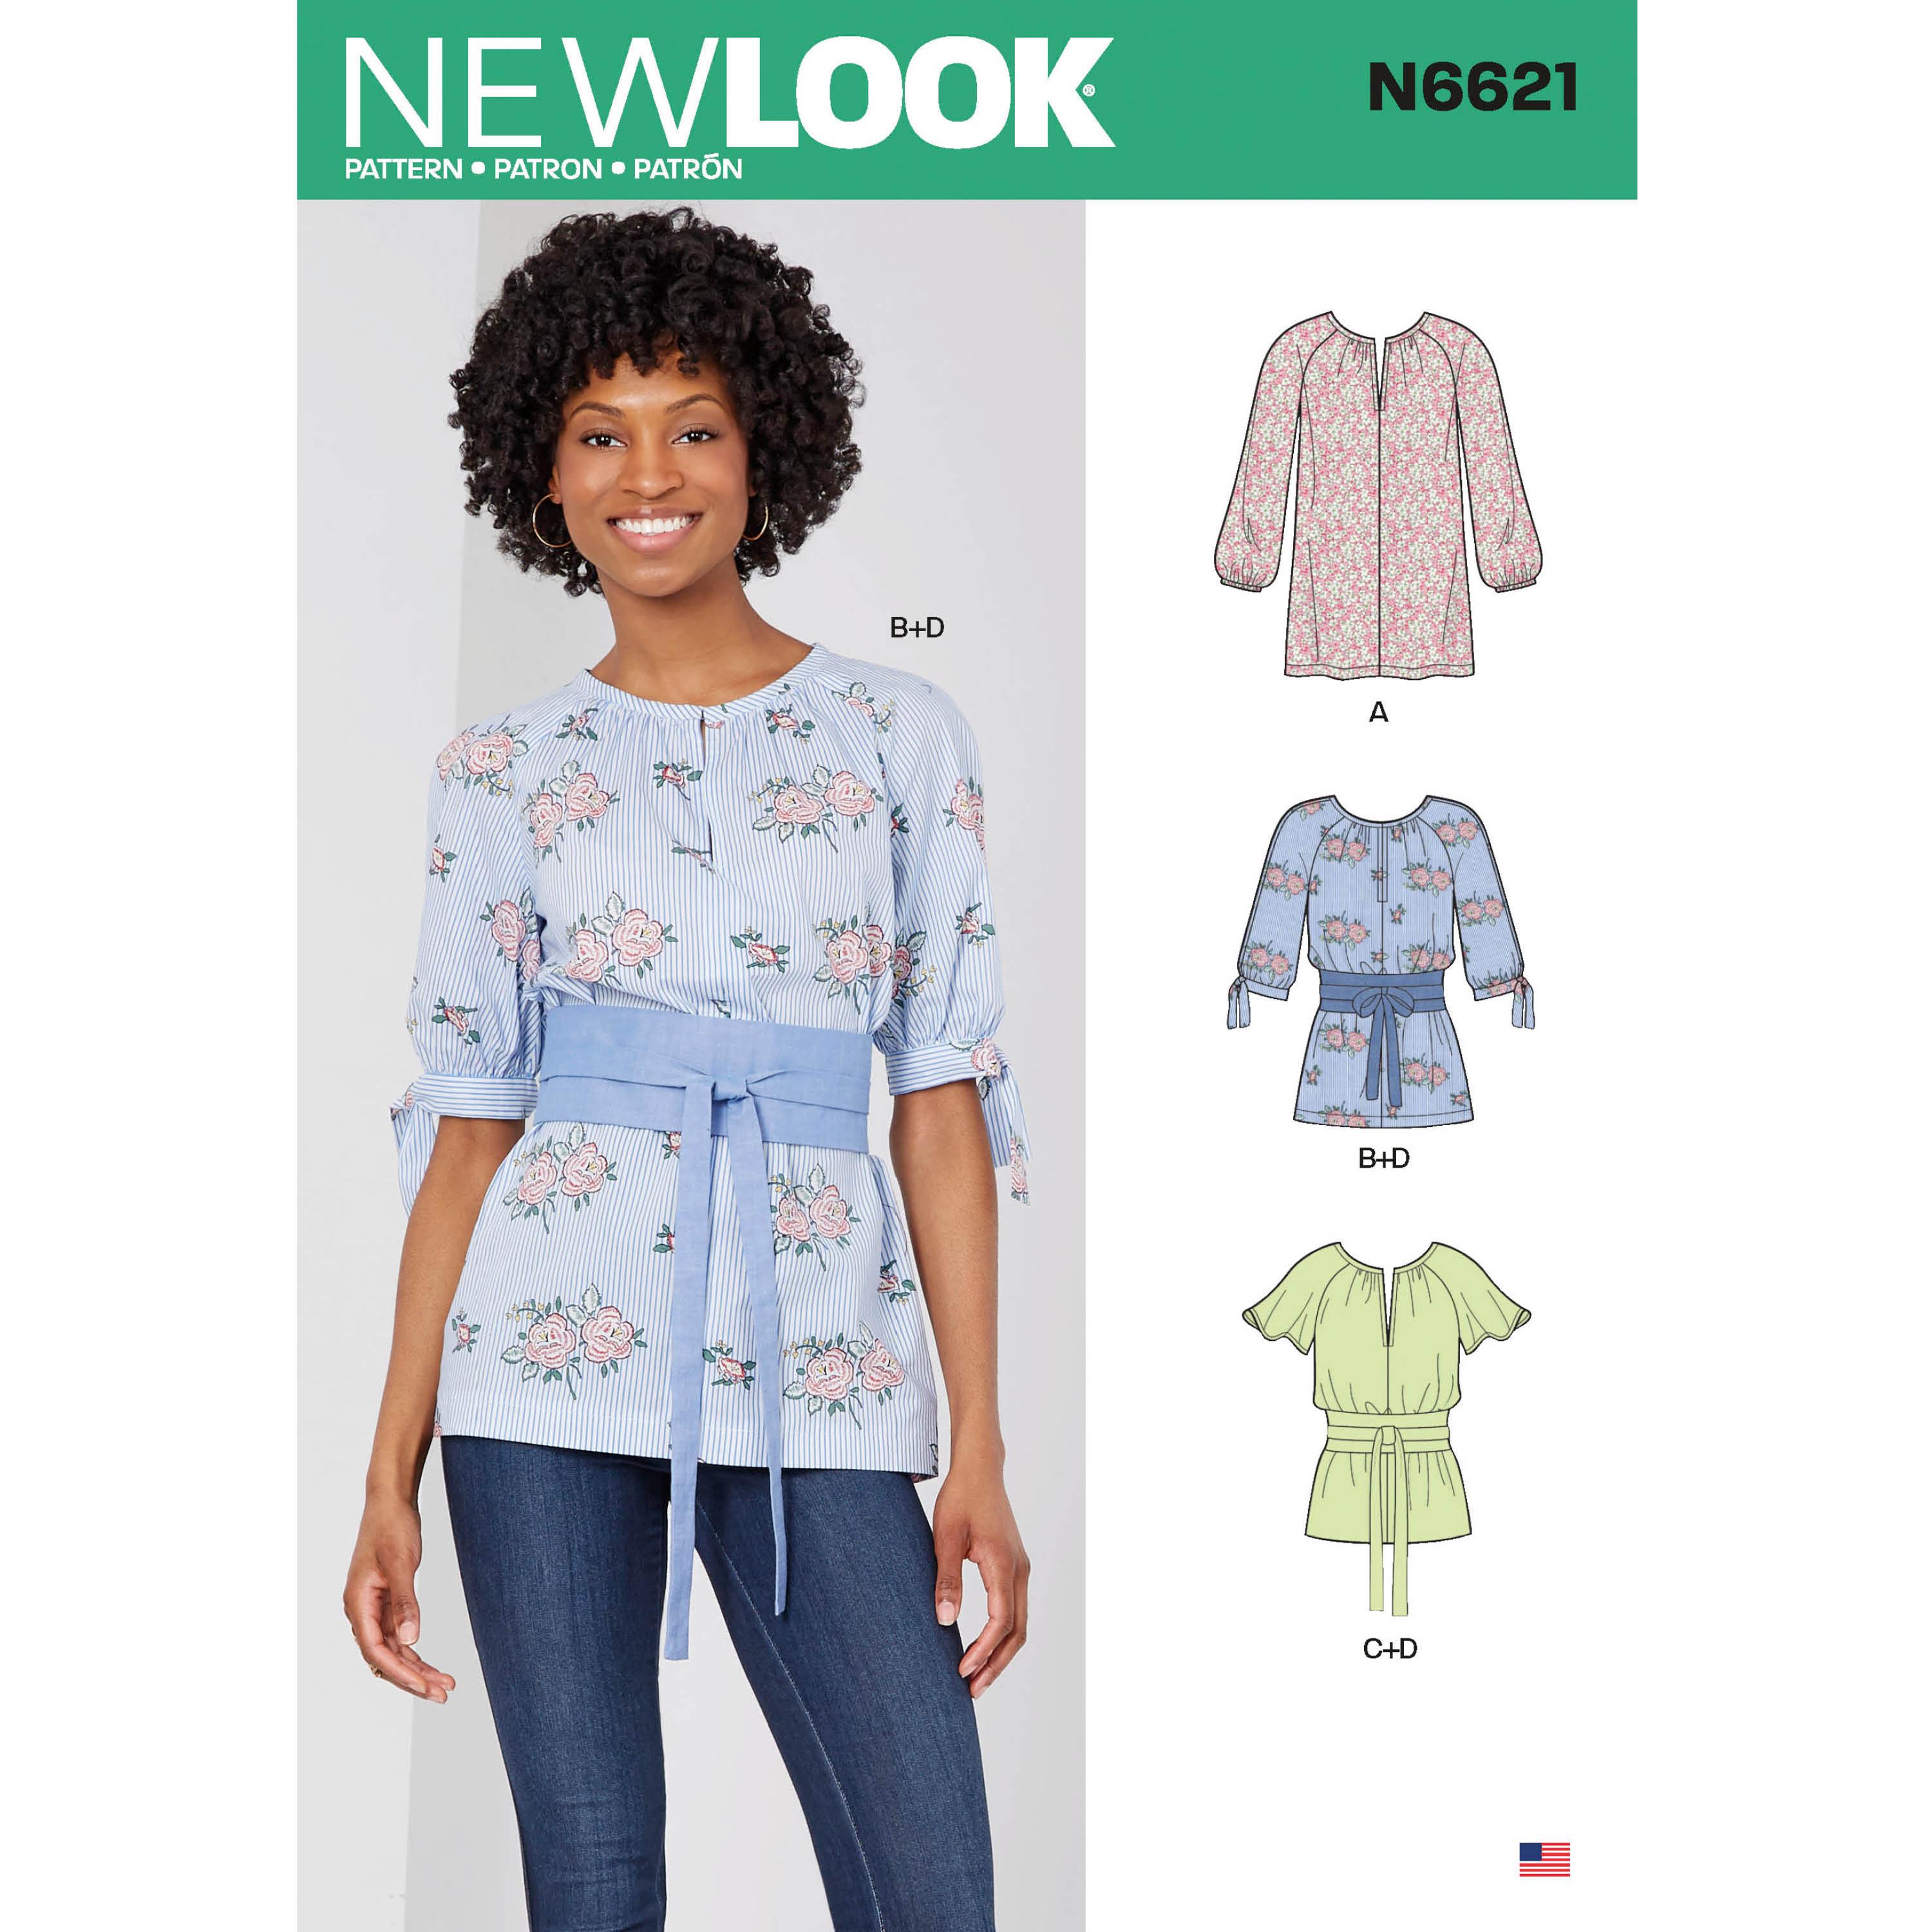 NewLook Sewing Pattern N6621 Misses' Top Or Tunic